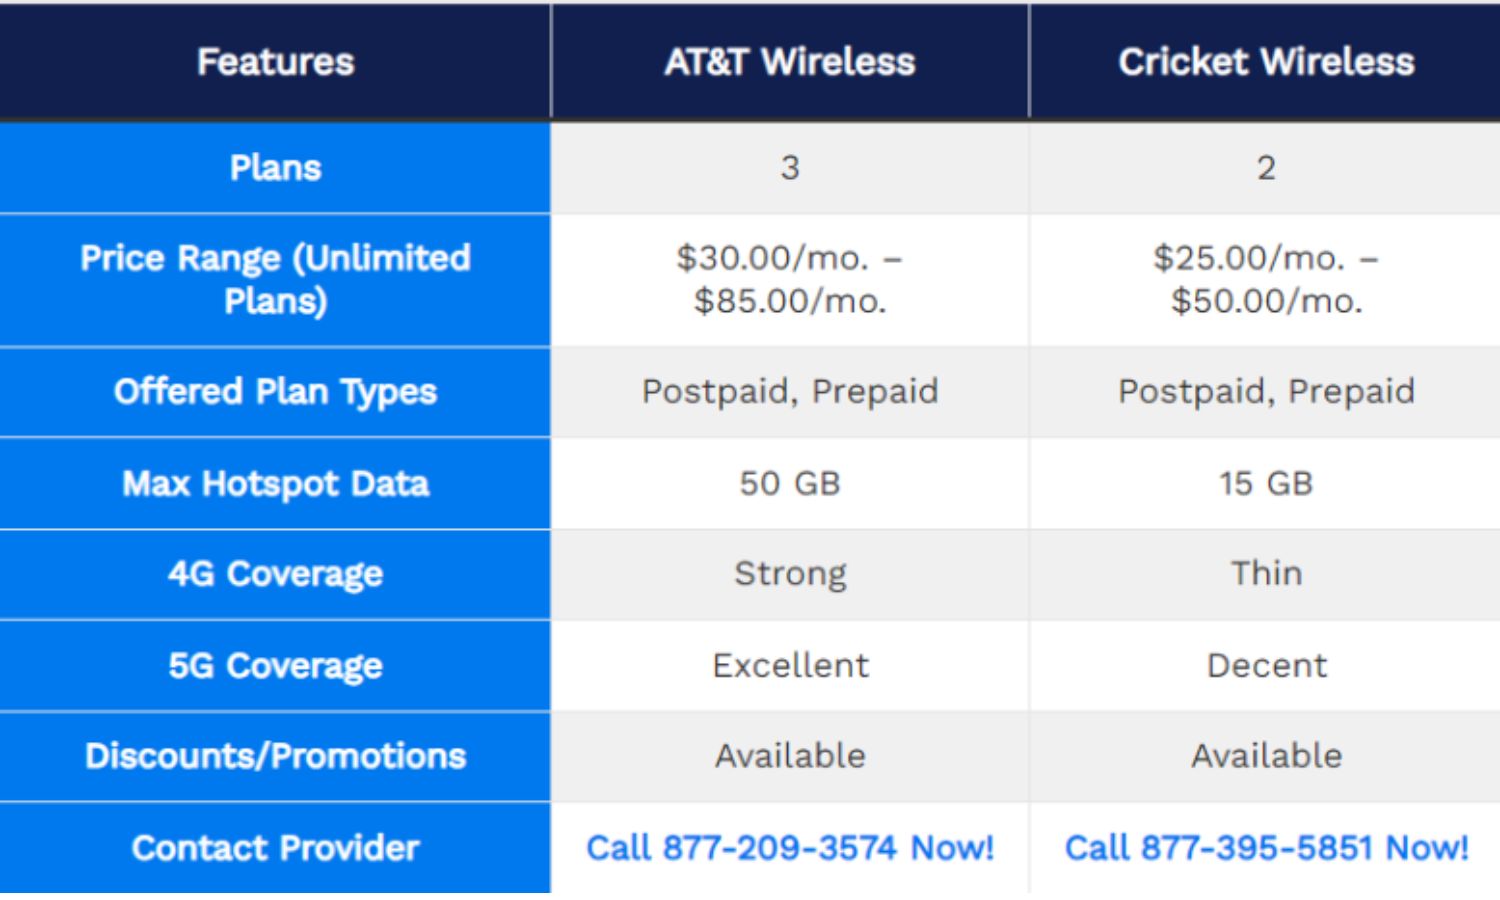 at&t and cricket price comparison